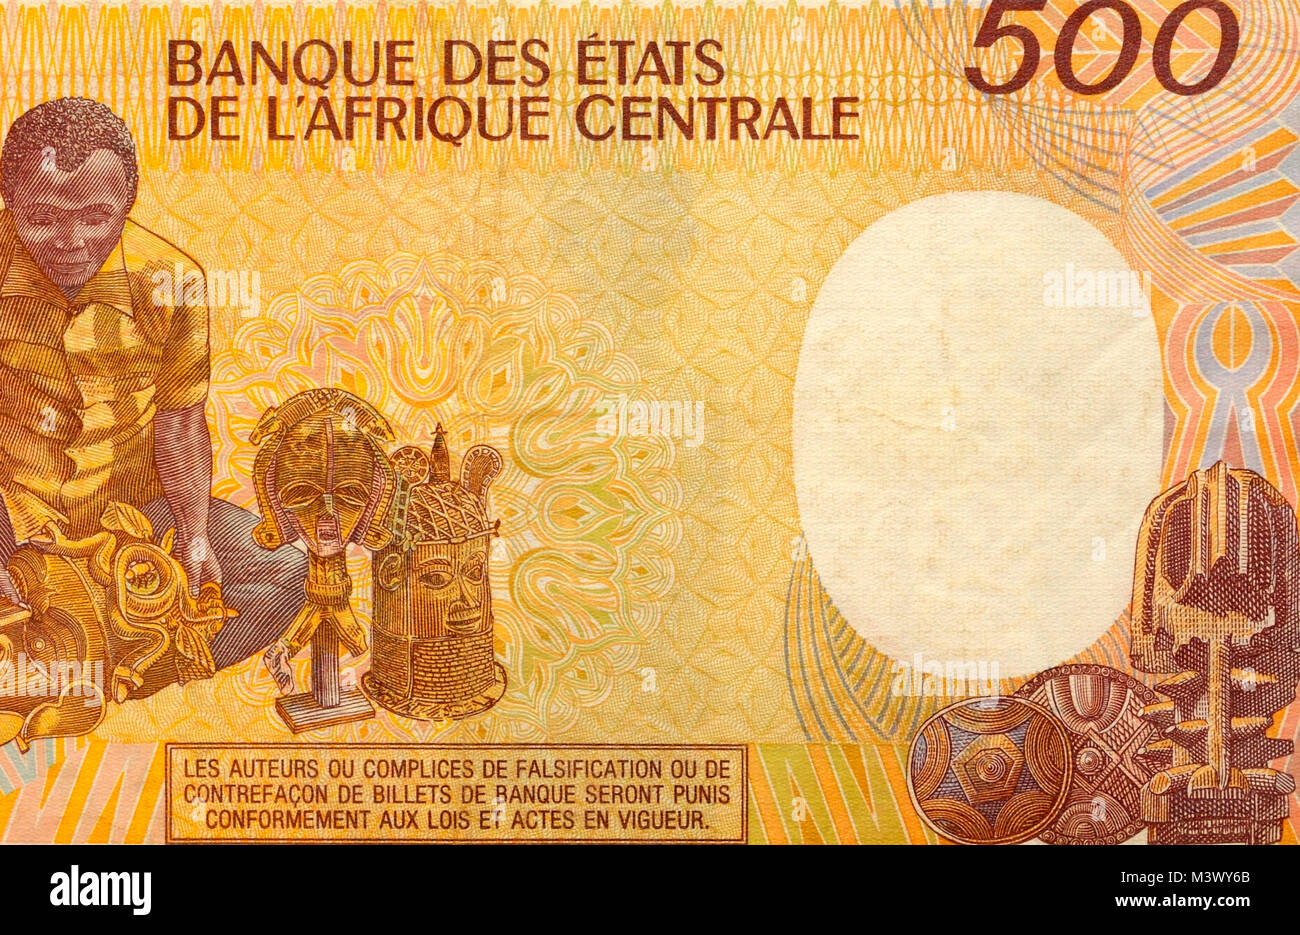 Chad 500 Five Hundred Franc Bank note Stock Photo